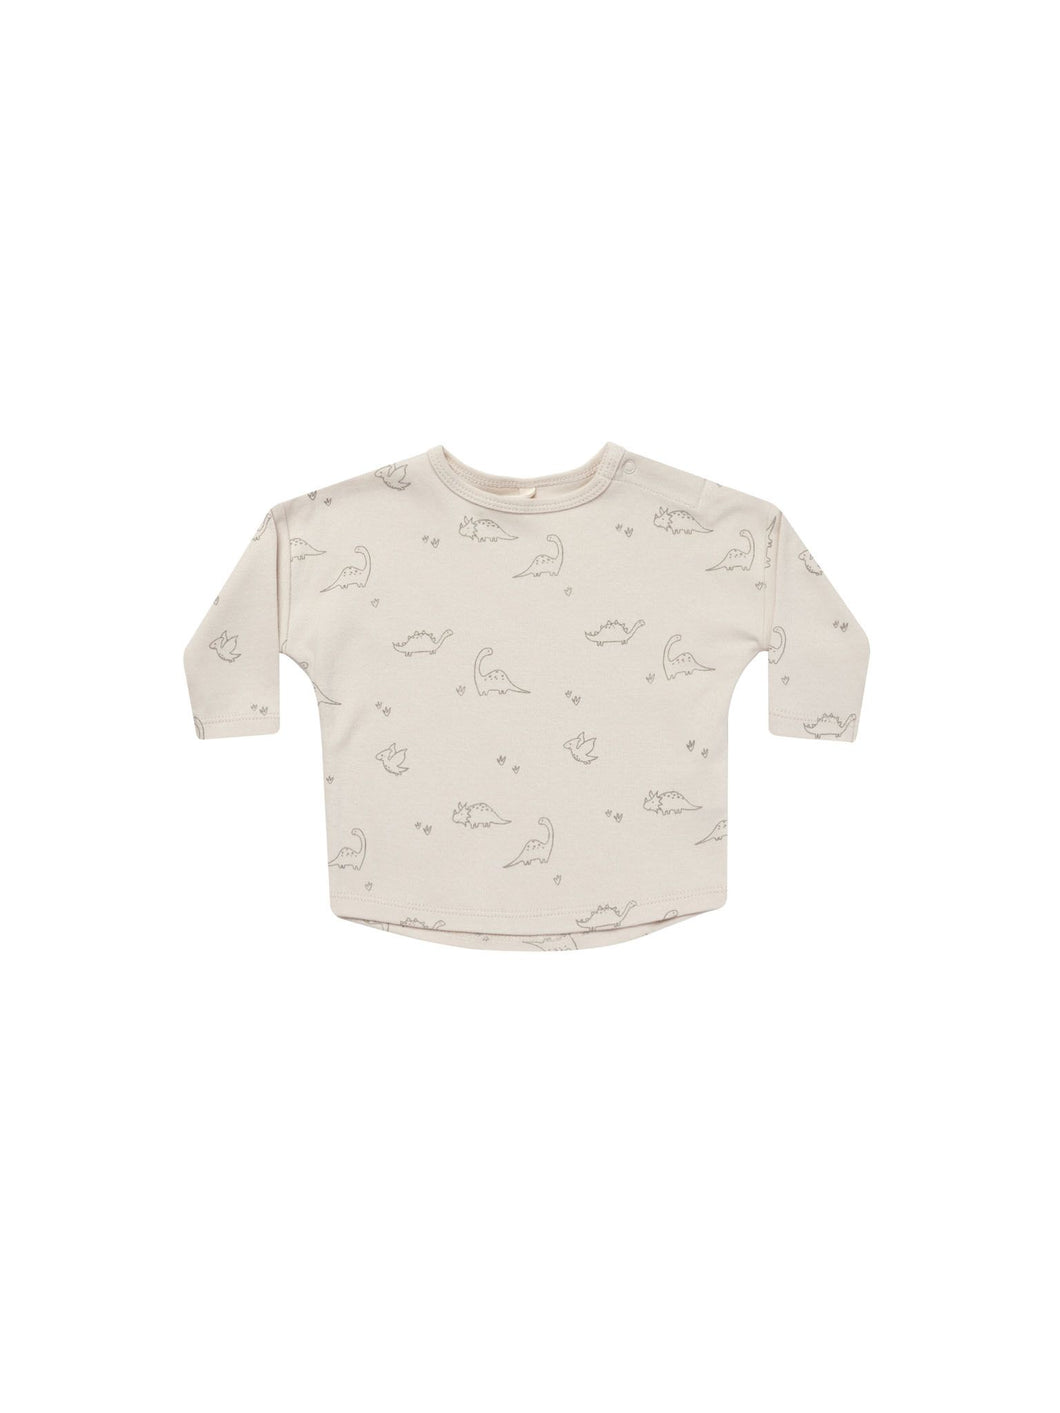 Long Sleeve Tee - Dino - SIZE 3-6 MONTHS